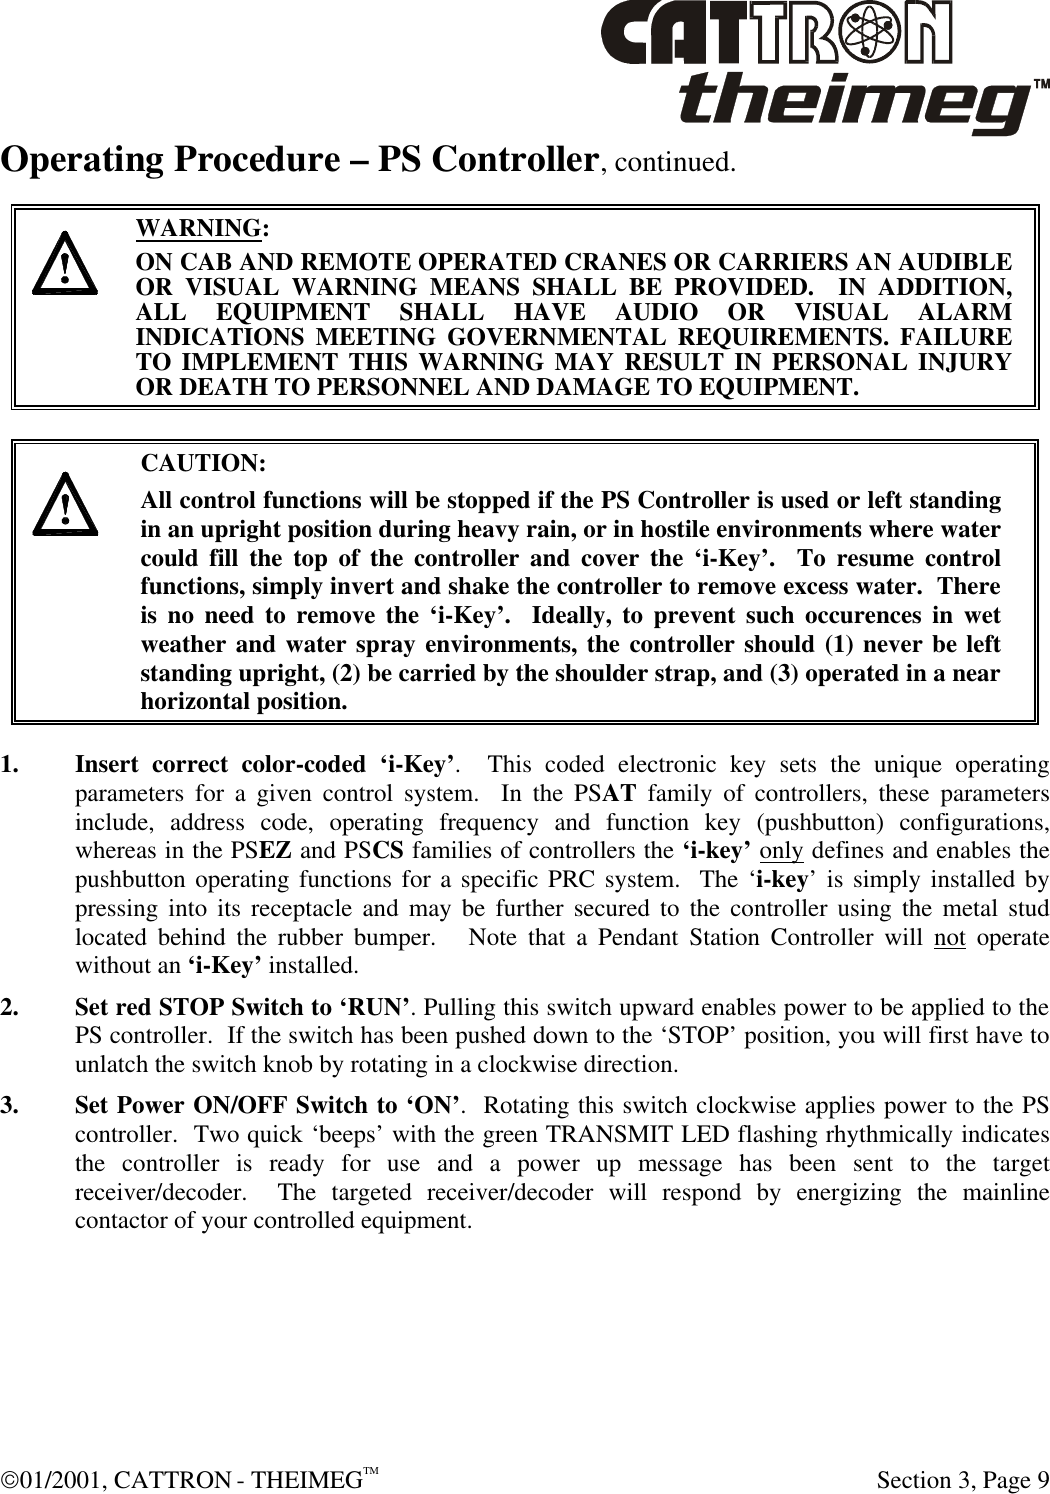  01/2001, CATTRON - THEIMEGTM  Section 3, Page 9 Operating Procedure – PS Controller, continued.     WARNING: ON CAB AND REMOTE OPERATED CRANES OR CARRIERS AN AUDIBLE OR VISUAL WARNING MEANS SHALL BE PROVIDED.  IN ADDITION, ALL EQUIPMENT SHALL HAVE AUDIO OR VISUAL ALARM INDICATIONS MEETING GOVERNMENTAL REQUIREMENTS. FAILURE TO IMPLEMENT THIS WARNING MAY RESULT IN PERSONAL INJURY OR DEATH TO PERSONNEL AND DAMAGE TO EQUIPMENT.      CAUTION: All control functions will be stopped if the PS Controller is used or left standing in an upright position during heavy rain, or in hostile environments where water could fill the top of the controller and cover the ‘i-Key’.  To resume control functions, simply invert and shake the controller to remove excess water.  There is no need to remove the ‘i-Key’.  Ideally, to prevent such occurences in wet weather and water spray environments, the controller should (1) never be left standing upright, (2) be carried by the shoulder strap, and (3) operated in a near horizontal position. 1. Insert correct color-coded ‘i-Key’.  This coded electronic key sets the unique operating parameters for a given control system.  In the PSAT family of controllers, these parameters include, address code, operating frequency and function key (pushbutton) configurations, whereas in the PSEZ and PSCS families of controllers the ‘i-key’ only defines and enables the pushbutton operating functions for a specific PRC system.  The ‘i-key’ is simply installed by pressing into its receptacle and may be further secured to the controller using the metal stud located behind the rubber bumper.   Note that a Pendant Station Controller will not operate without an ‘i-Key’ installed. 2. Set red STOP Switch to ‘RUN’. Pulling this switch upward enables power to be applied to the PS controller.  If the switch has been pushed down to the ‘STOP’ position, you will first have to unlatch the switch knob by rotating in a clockwise direction. 3. Set Power ON/OFF Switch to ‘ON’.  Rotating this switch clockwise applies power to the PS controller.  Two quick ‘beeps’ with the green TRANSMIT LED flashing rhythmically indicates the controller is ready for use and a power up message has been sent to the target receiver/decoder.  The targeted receiver/decoder will respond by energizing the mainline contactor of your controlled equipment.  